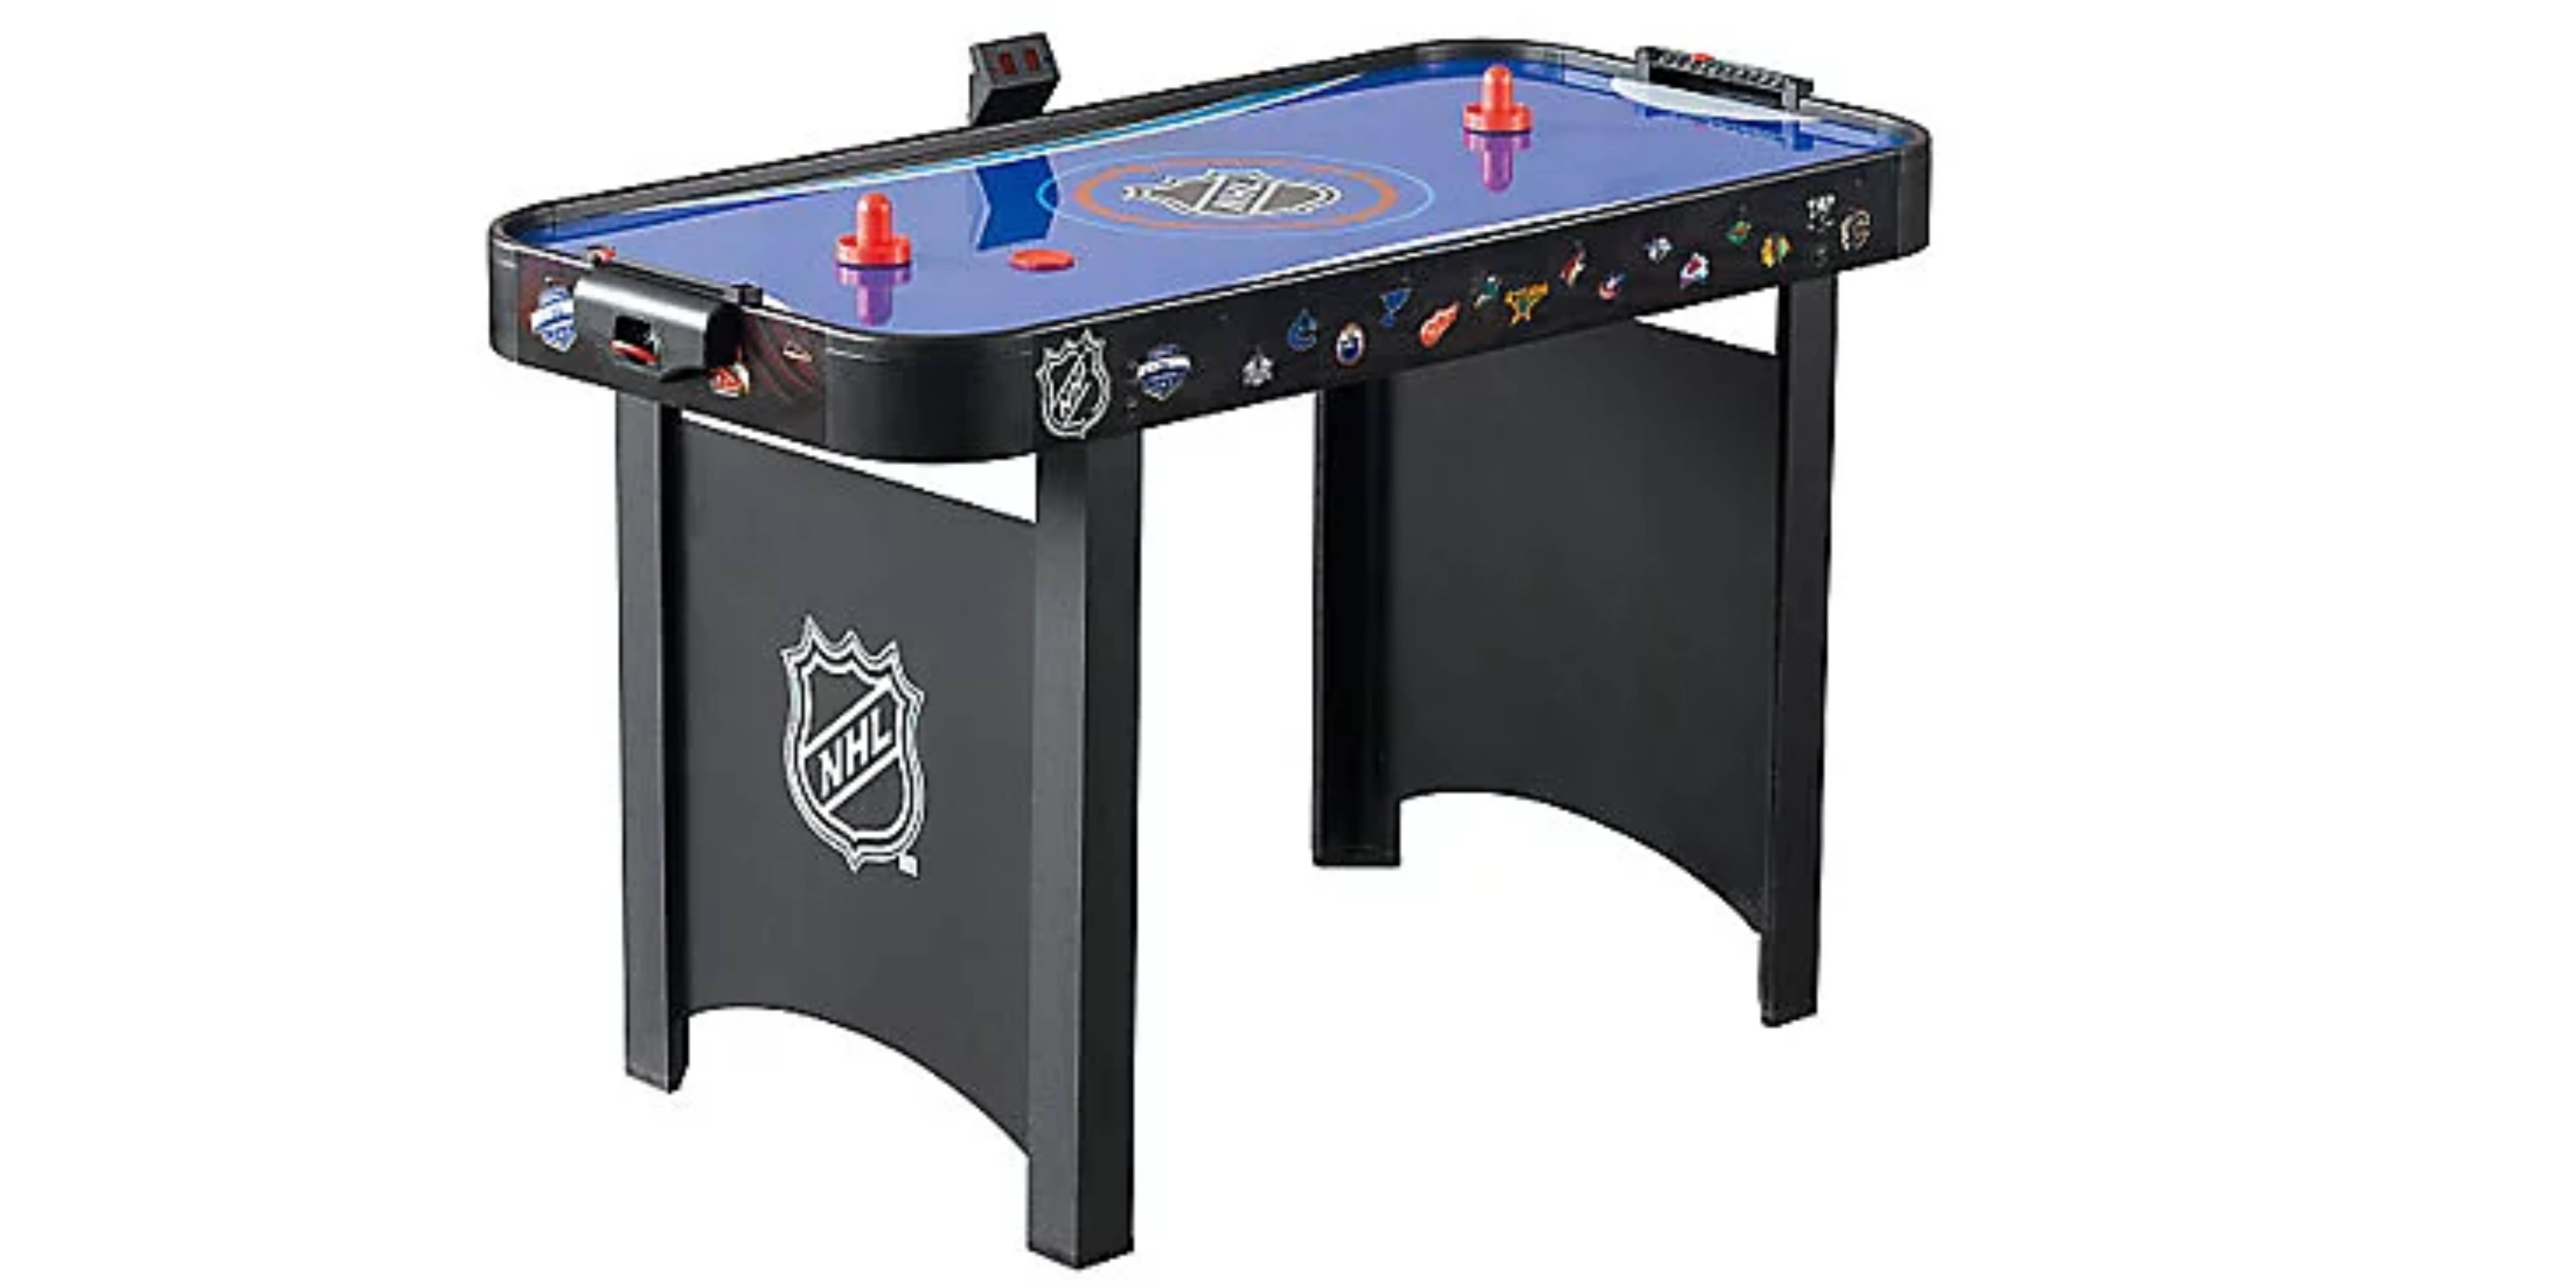 Halex Air Hockey Tables - Are They Still On The Market?